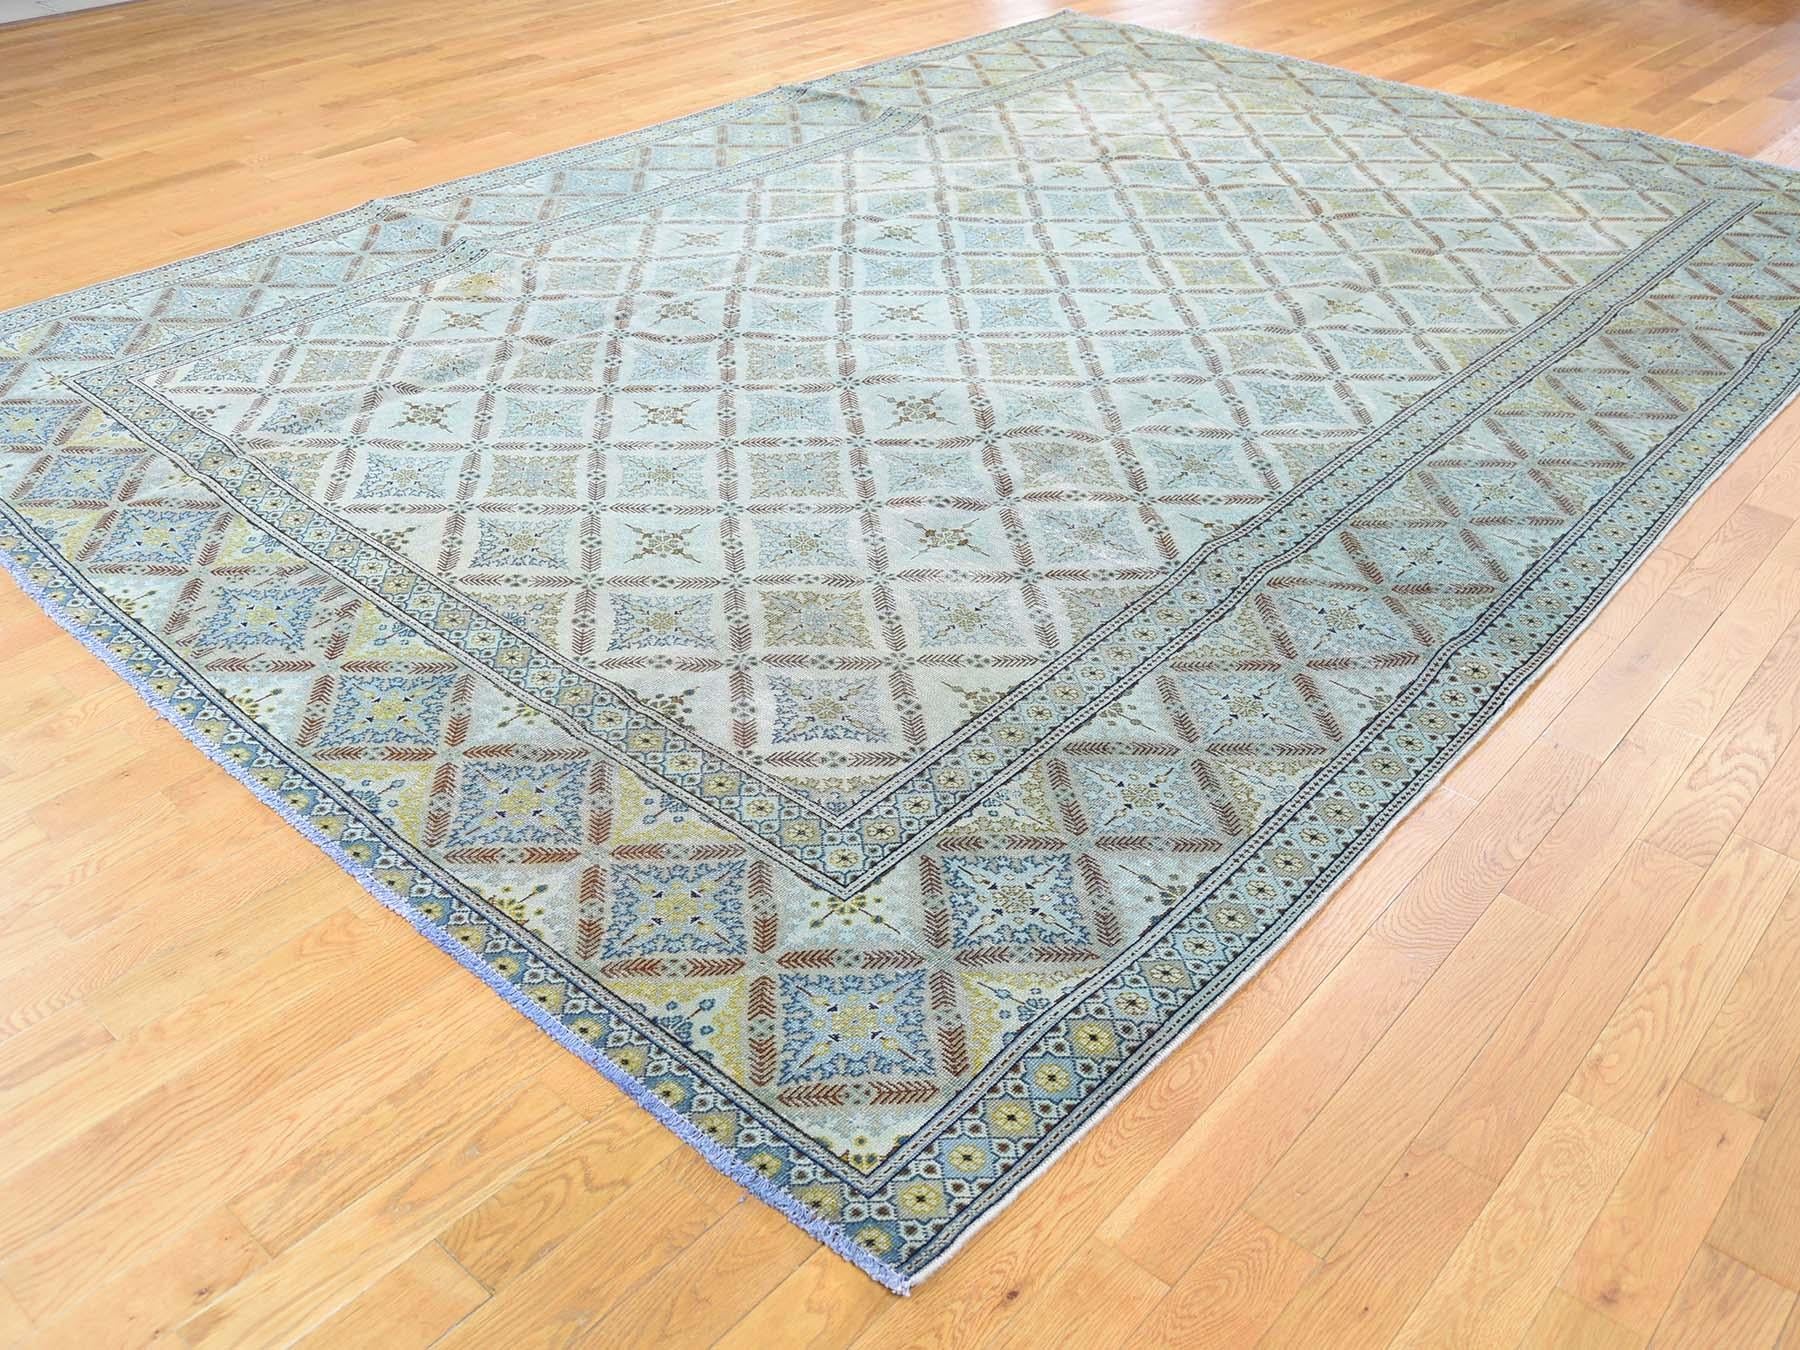 Vintage Persian Kashan Even Wear Hand-Knotted Oriental Rug, 8'10